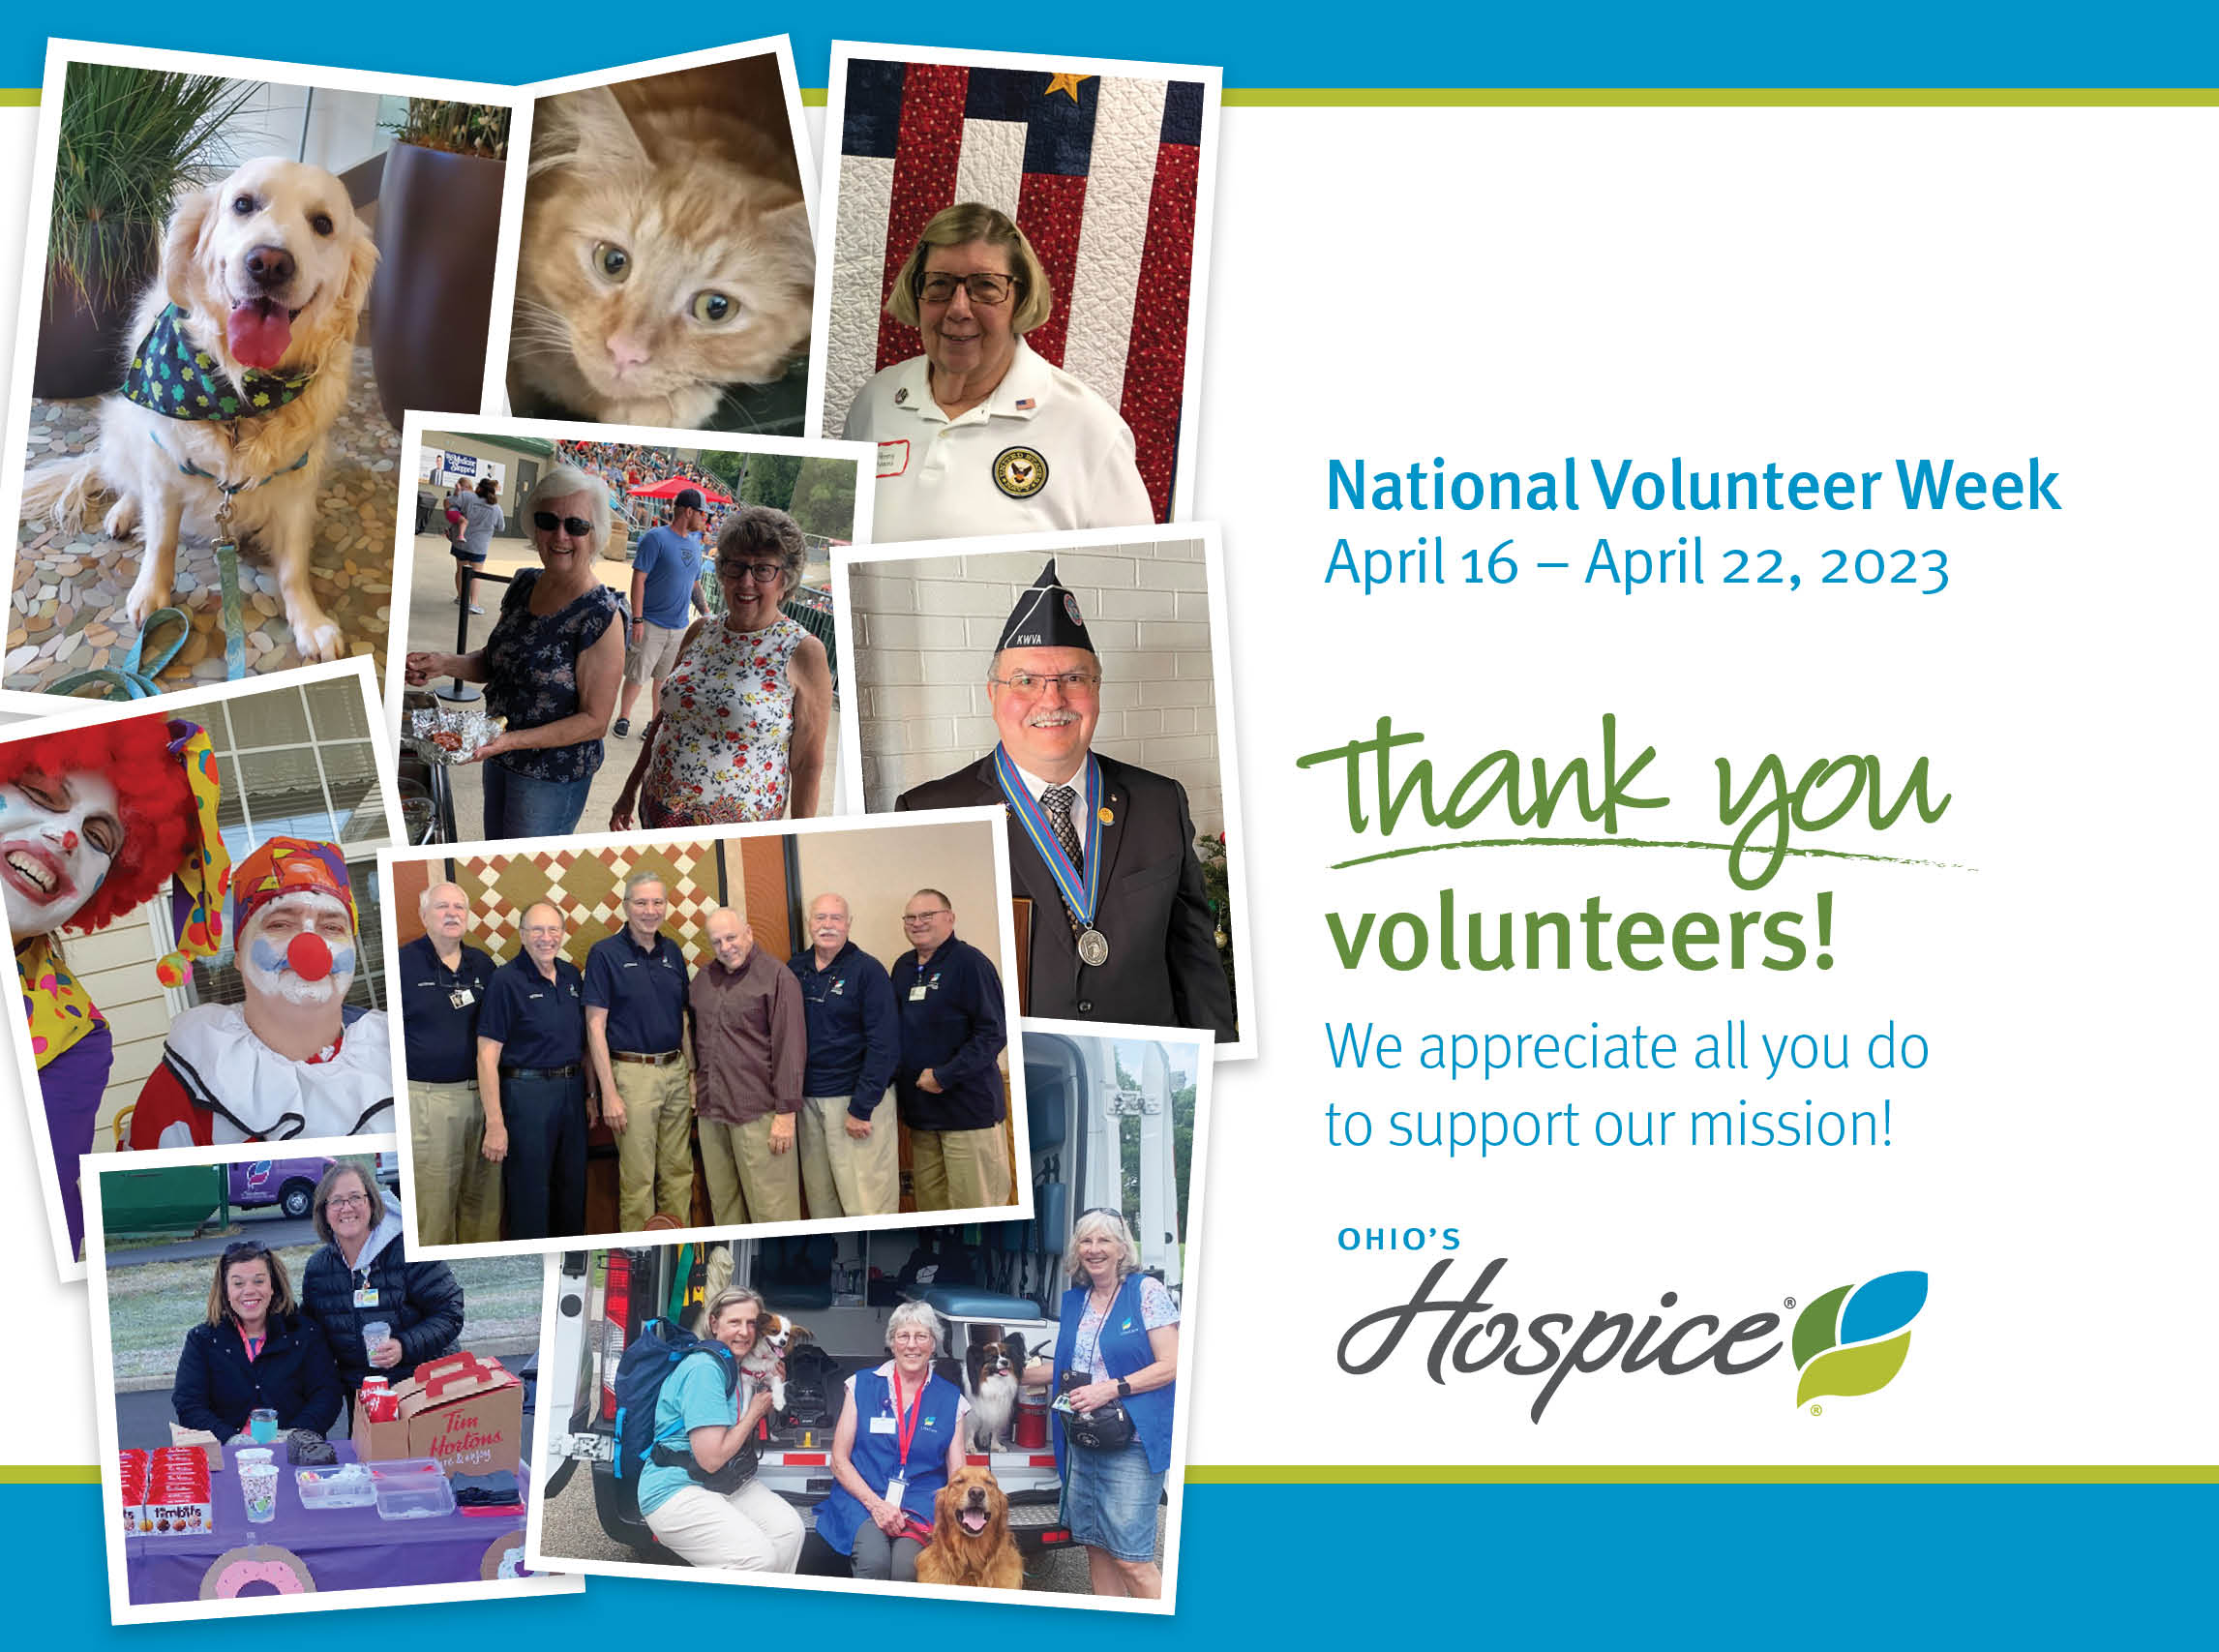 National Volunteer Week April 16 to April 22, 2023. Thank you volunteers! We appreciate all you do to support our mission! Ohio's Hospice